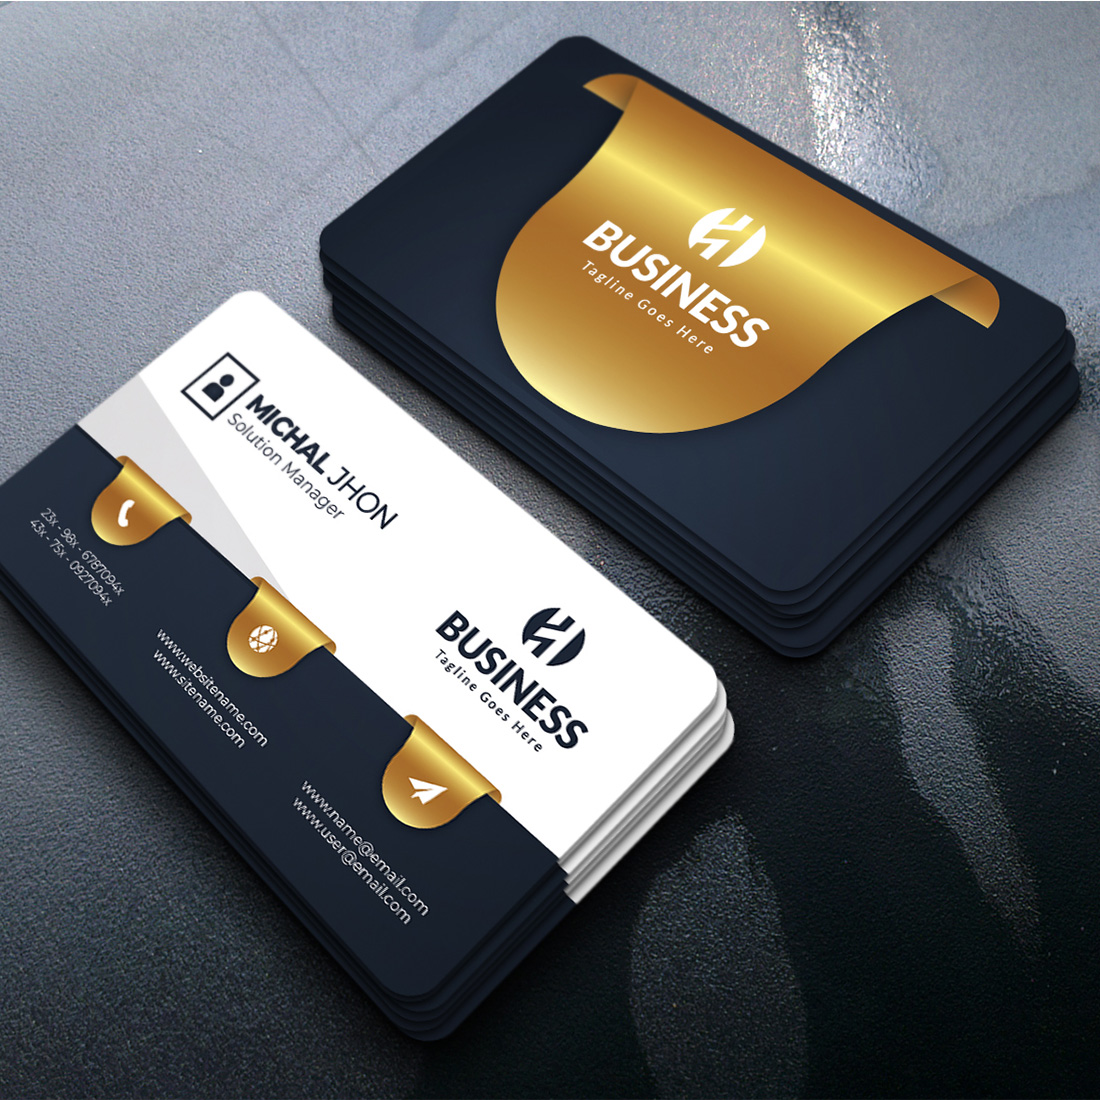 Gold Gradient and Black Luxury Business Card Design Template cover image.